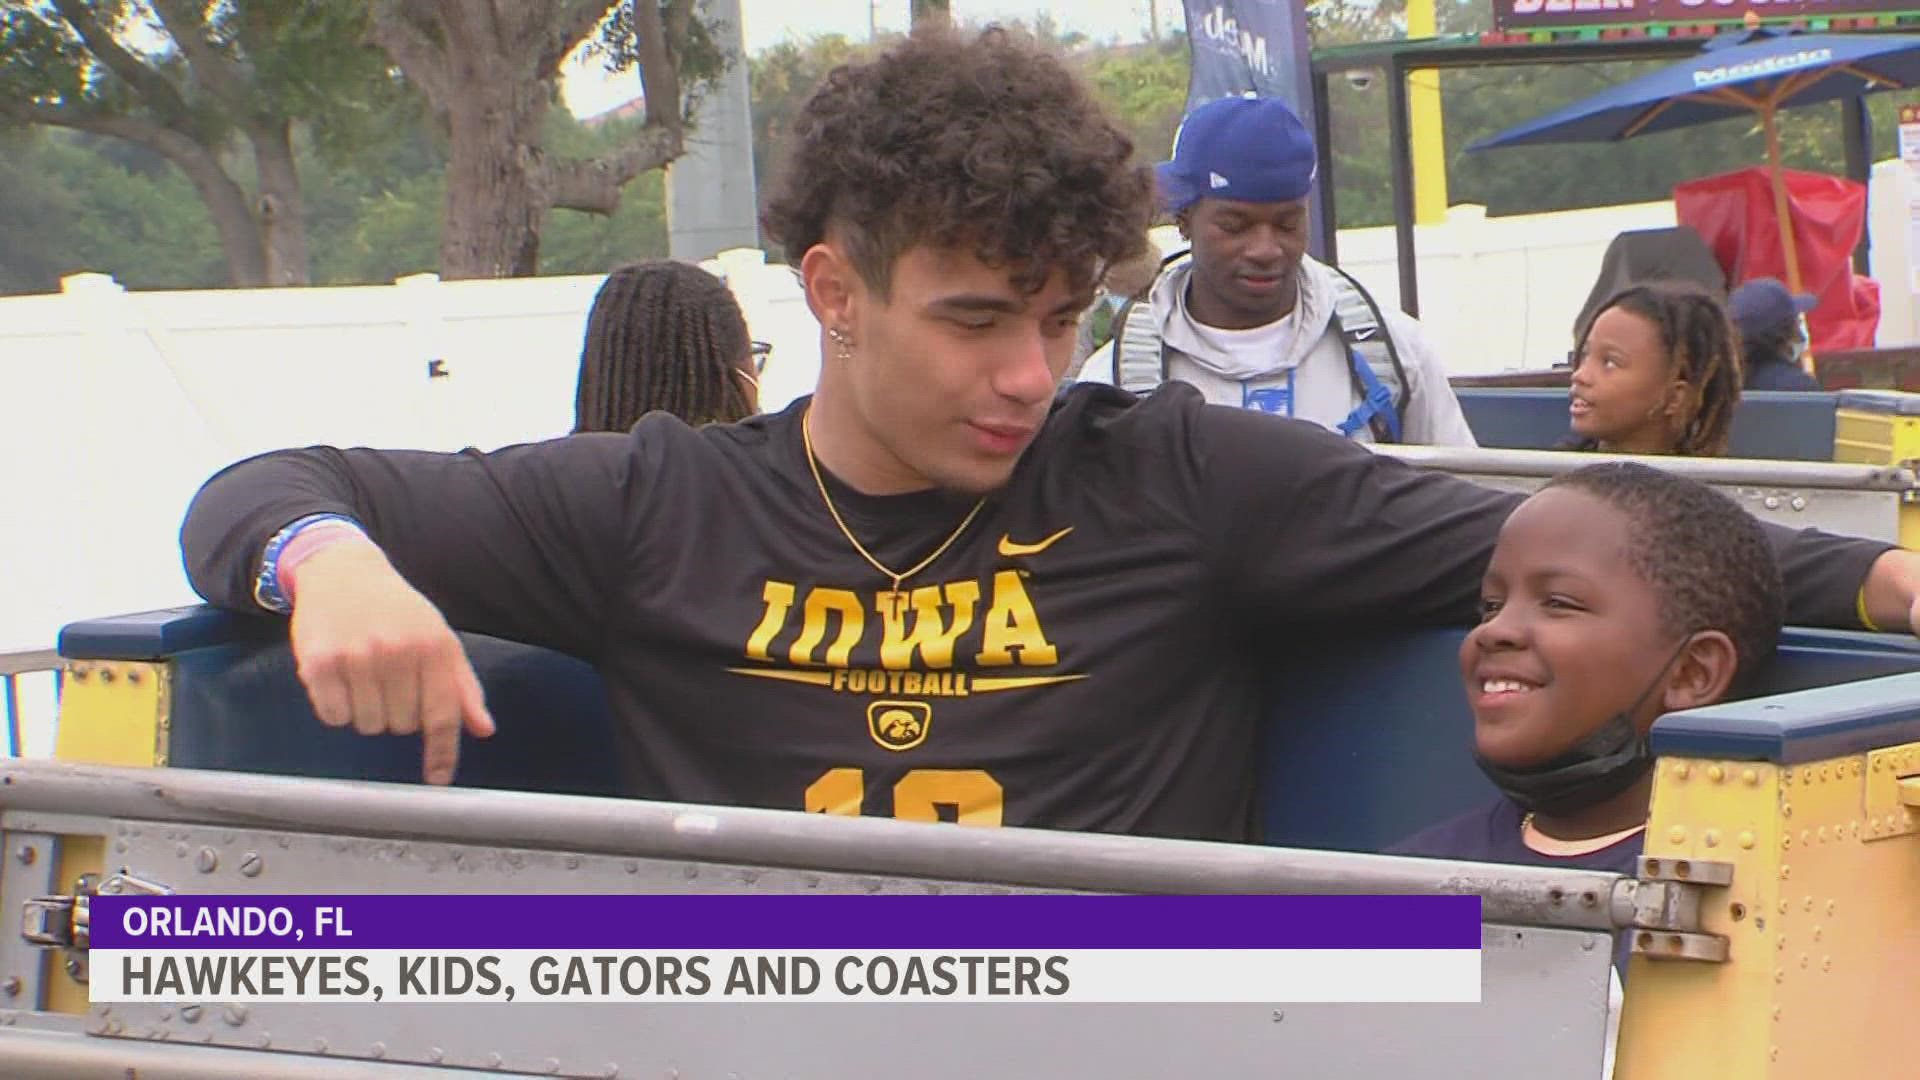 The Hawks didn't have to wait until Saturday's game to experience some thrills in Florida.